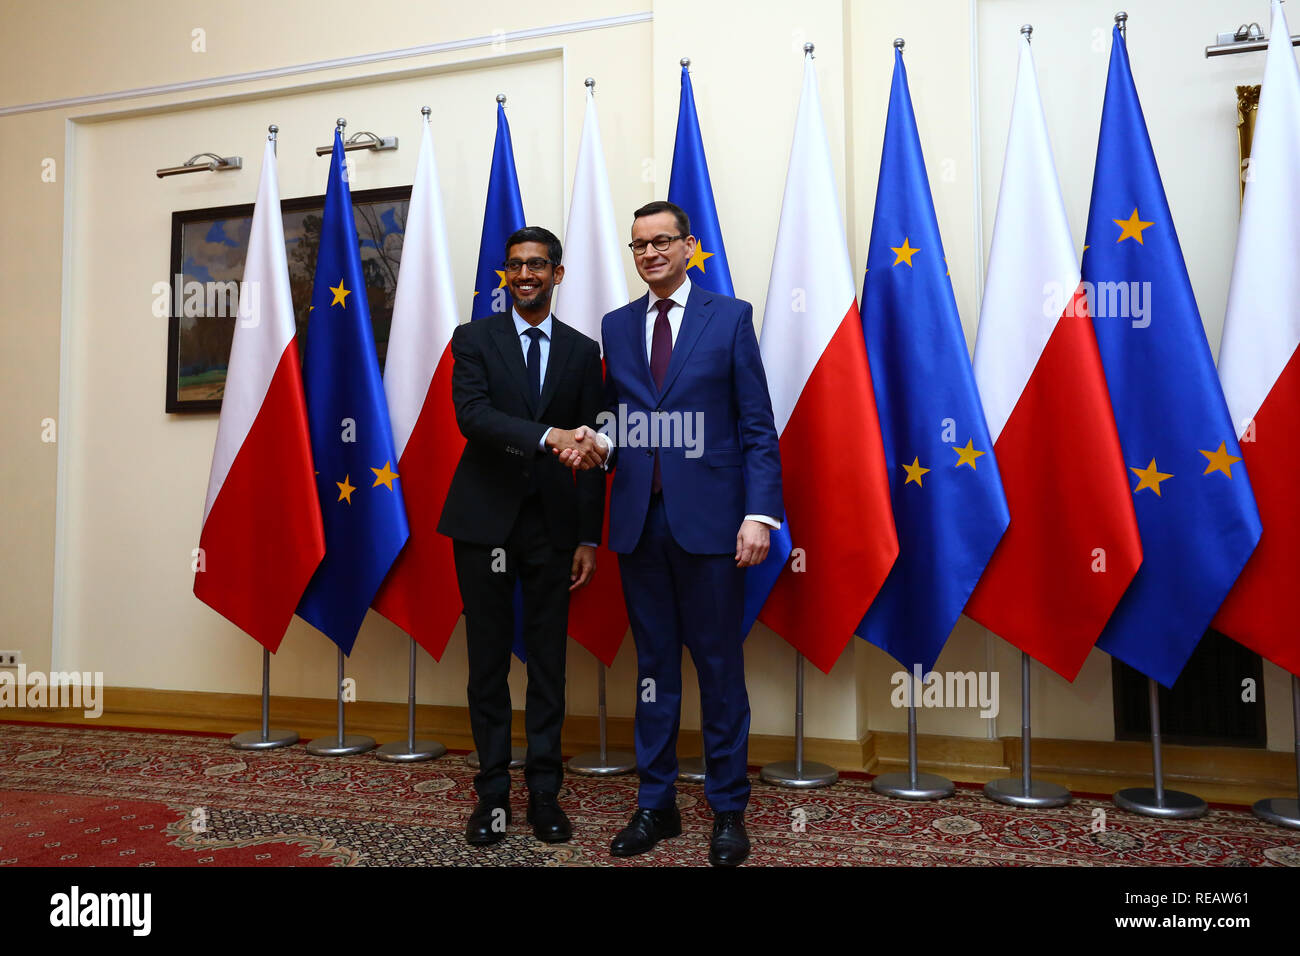 Poland, Warsaw, 21st January 2019: Google CEO Sundararajan Pichai (L) meets with Polish Prime Minister Mateusz Morawiecki (R) in Warsaw. Pichai visits Poland to participate in the 'Central and Eastern Innotvation Roundtable'. ©Jake Ratz/Alamy Live News Stock Photo